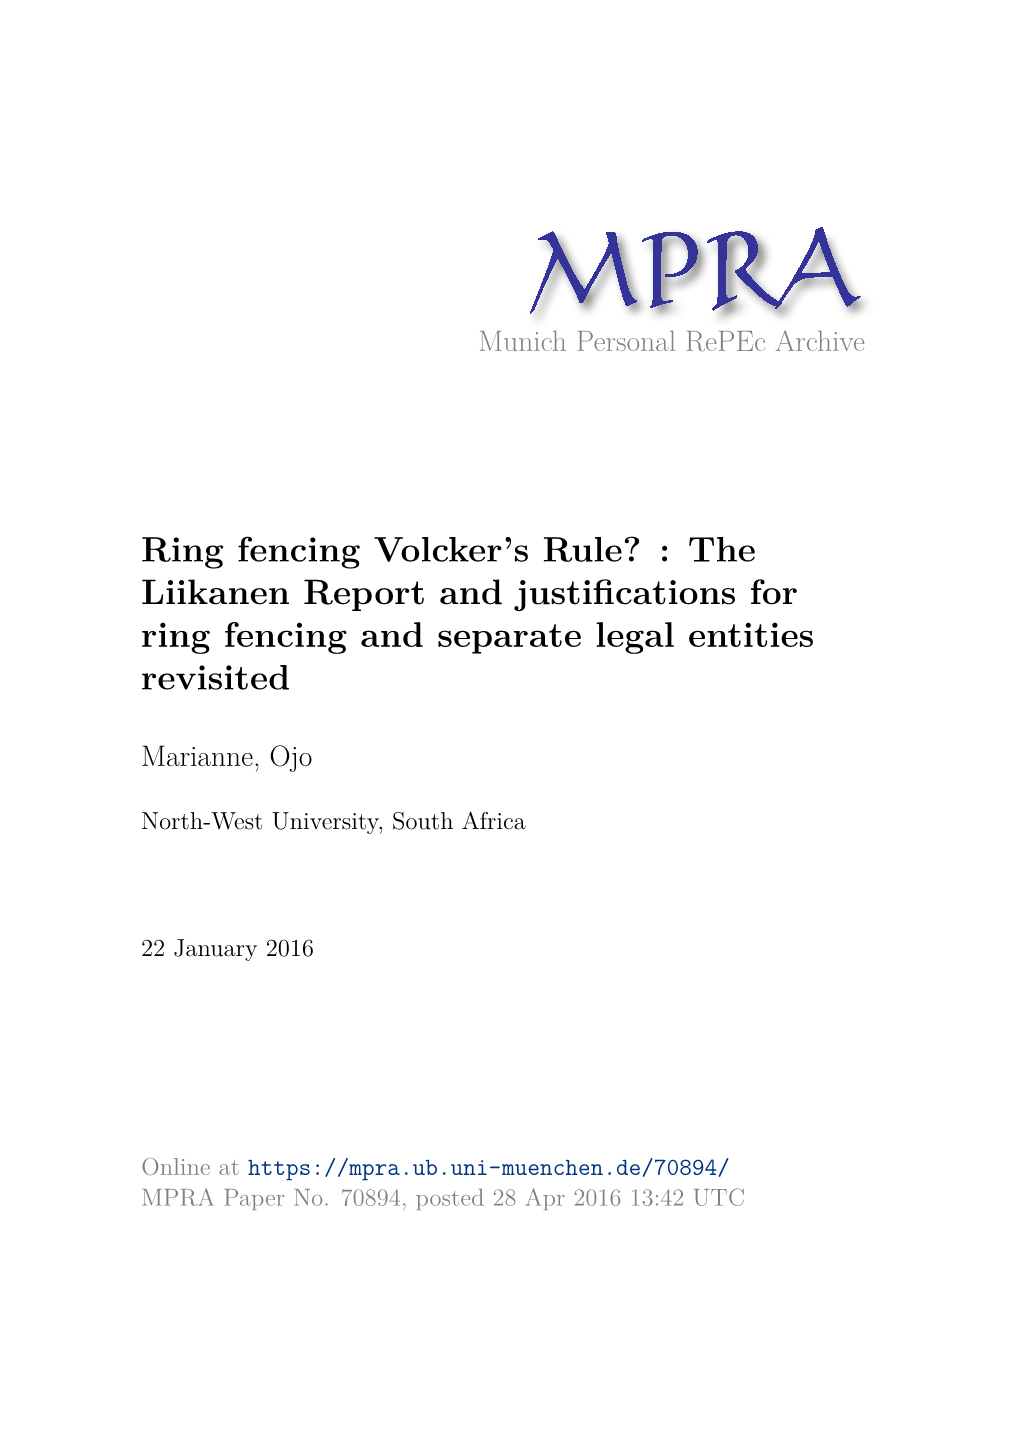 Ring Fencing Volcker's Rule? : the Liikanen Report and Justifications